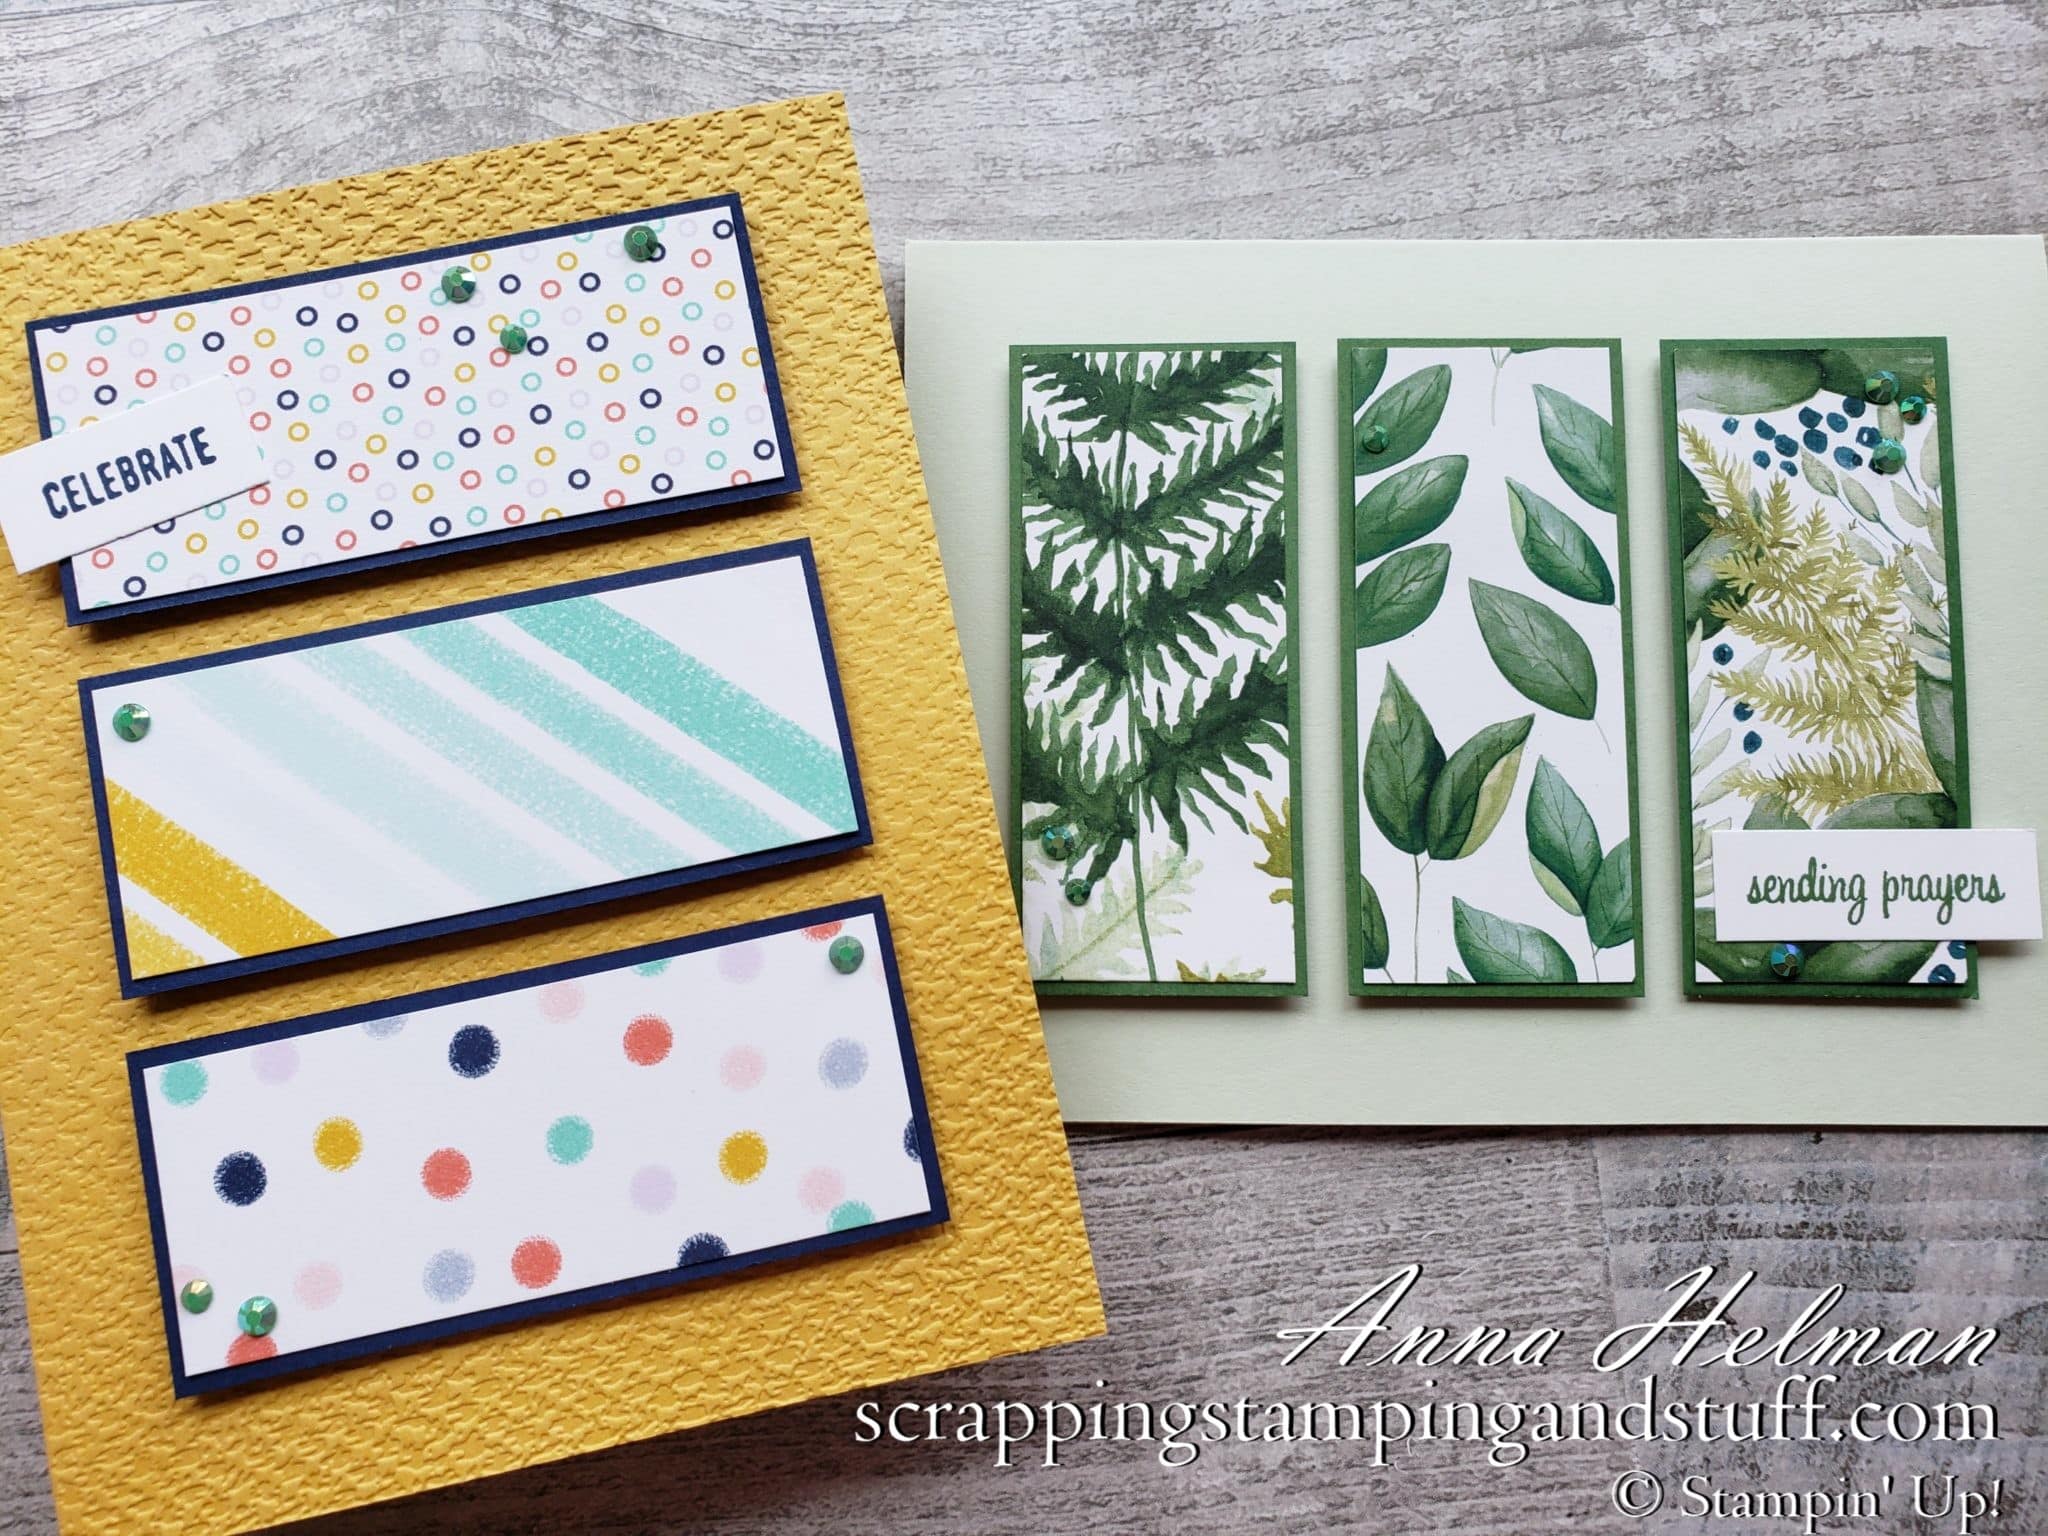 A Paper Scrap Panel Card – Another Way To Use Up Those Paper Scraps